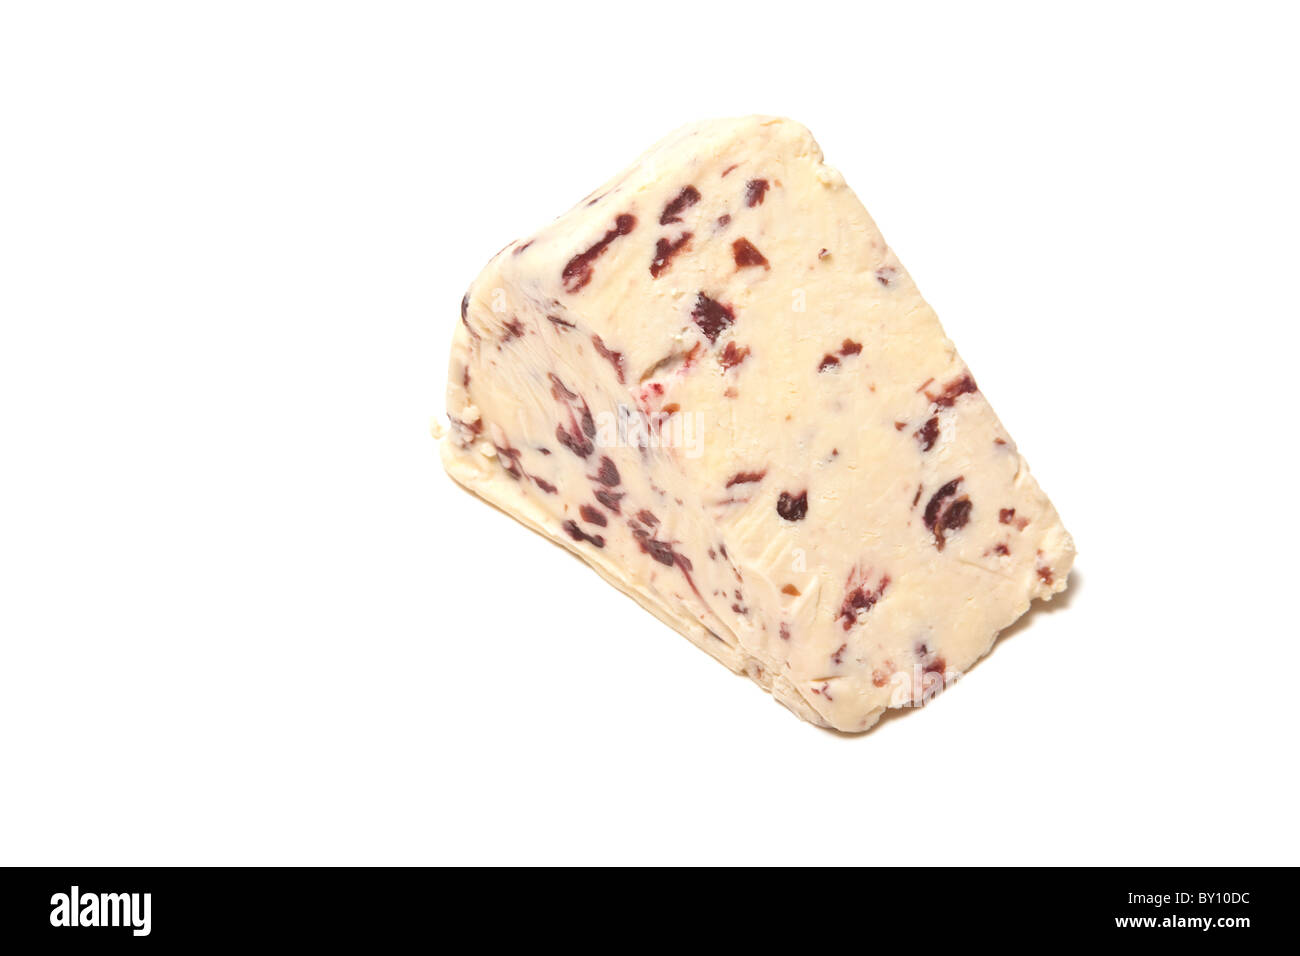 Wedge of Wensleydale and cranberry cheese isolated on a white studio background. Stock Photo